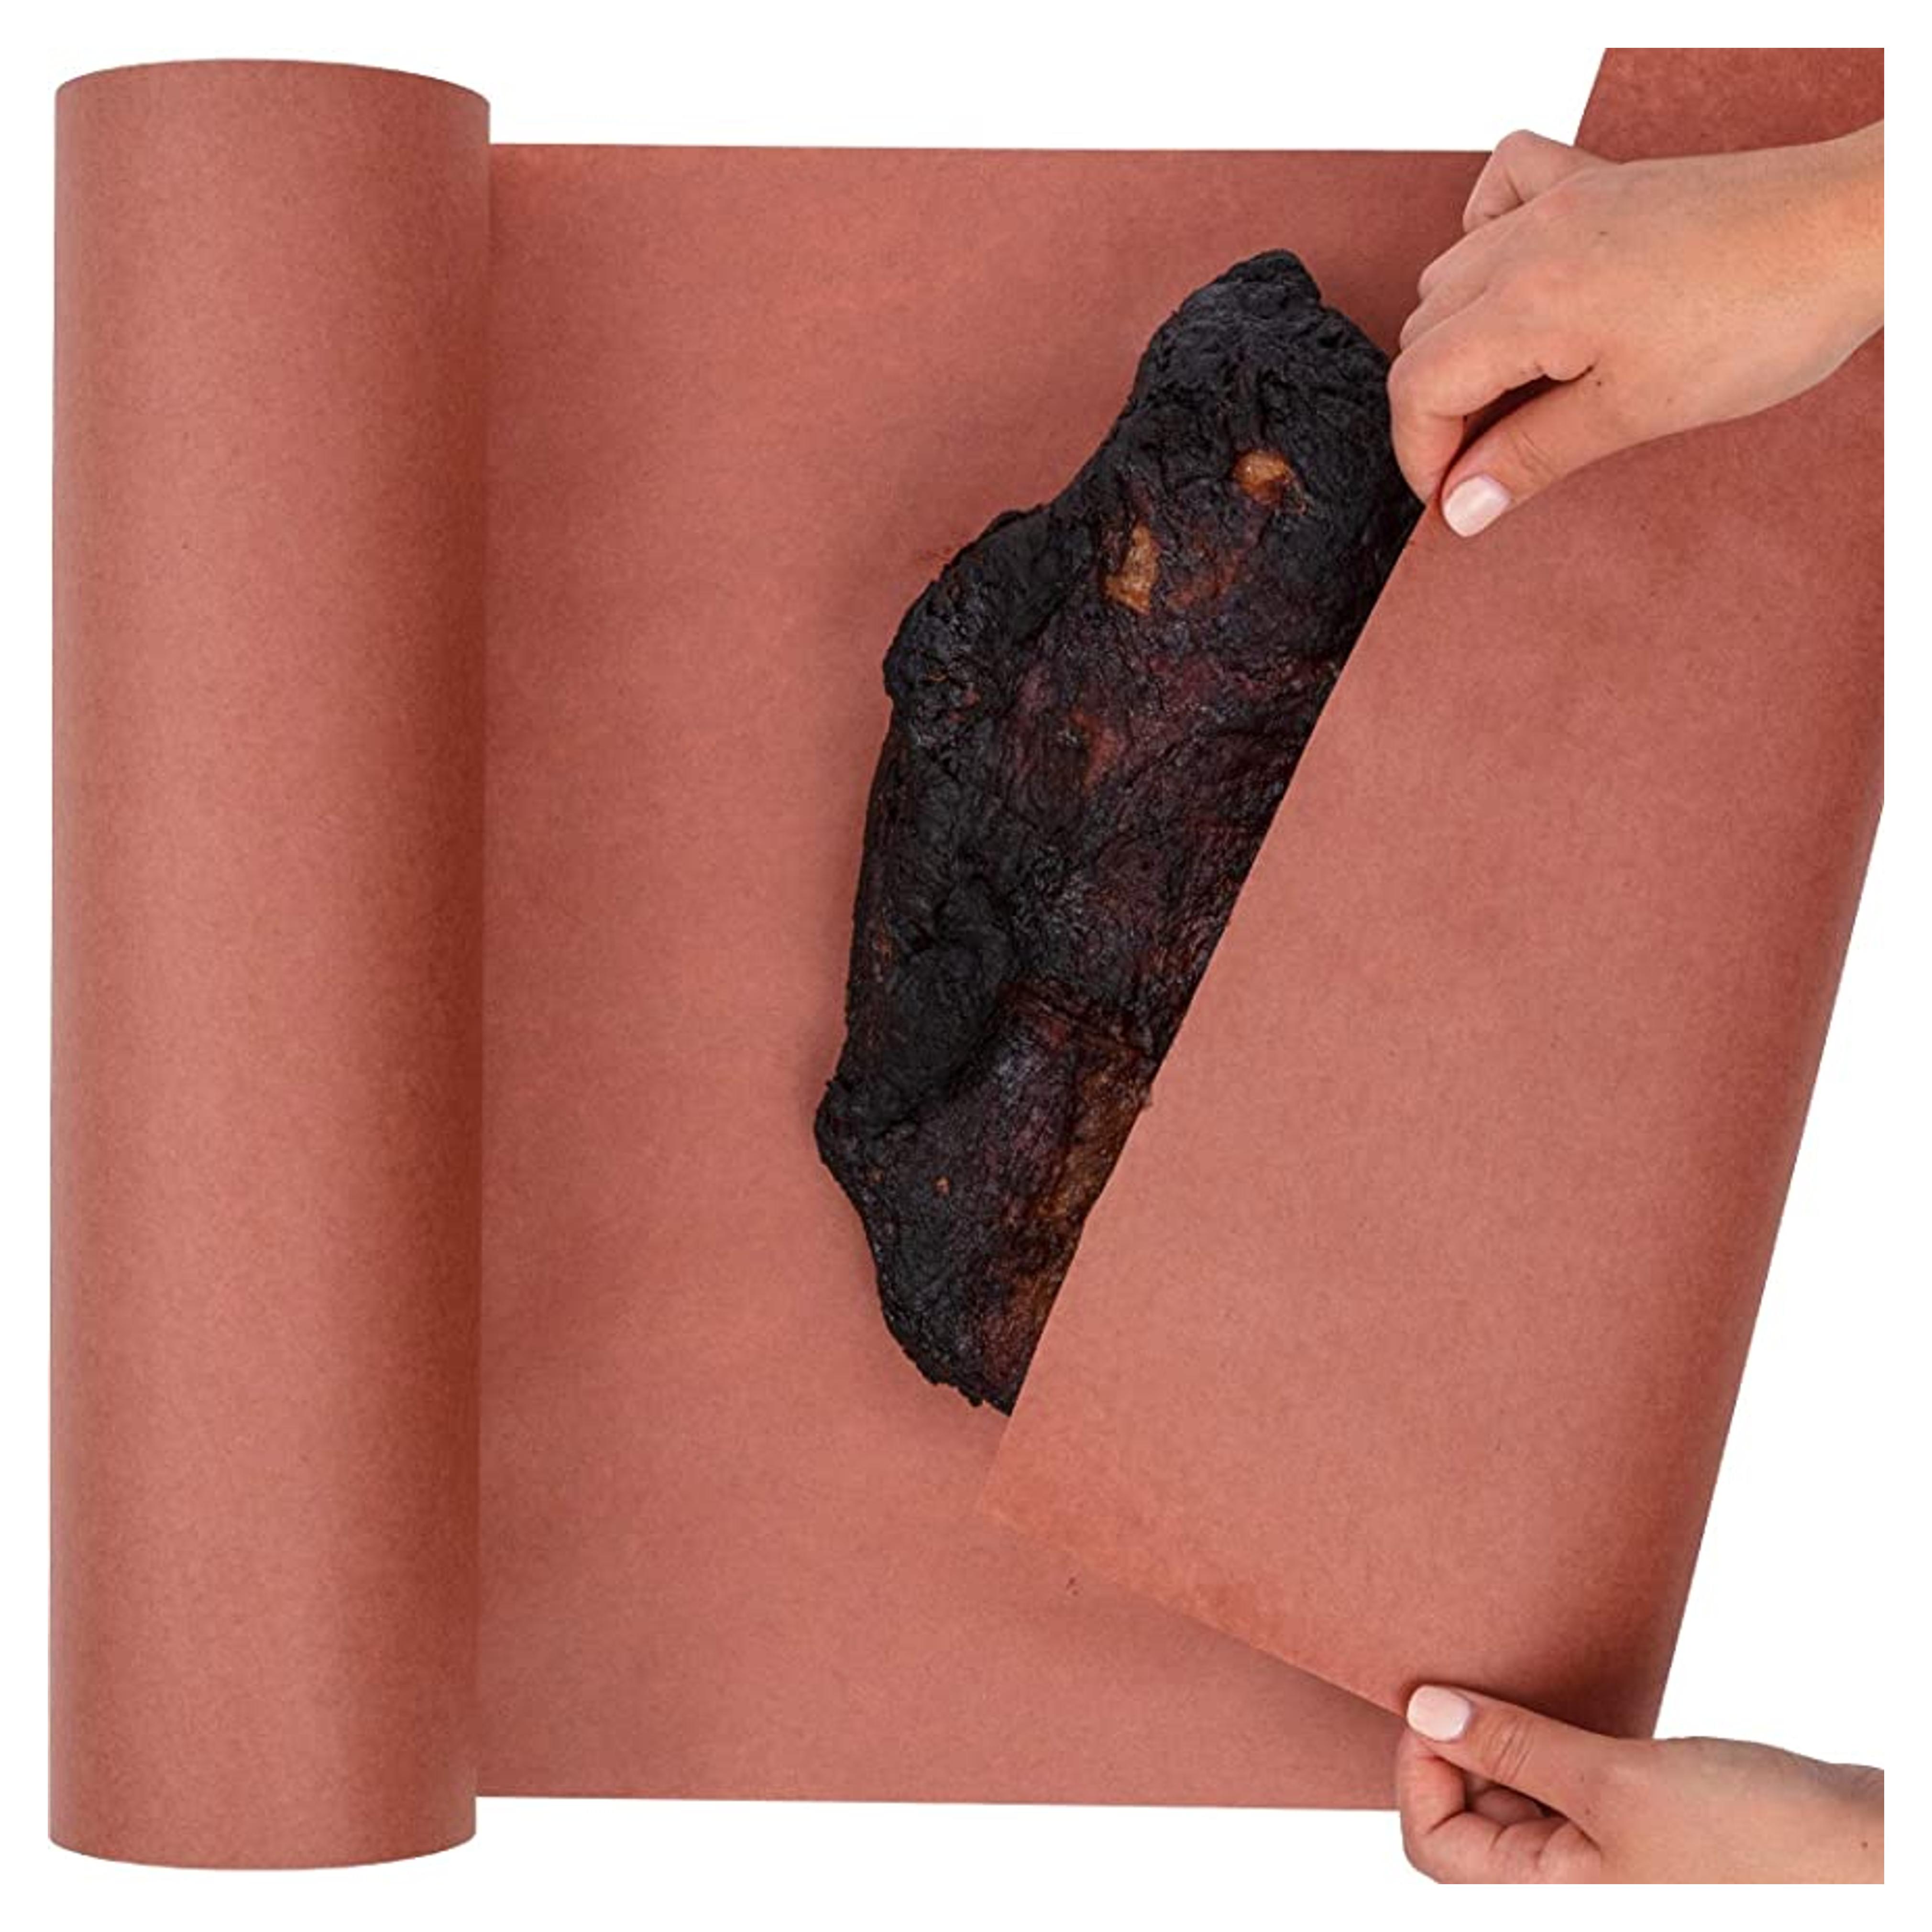 Pink Butcher Paper for Smoking Meat - Peach Butcher Paper Roll 18 by 200 Feet (2400 Inches) - USA Made